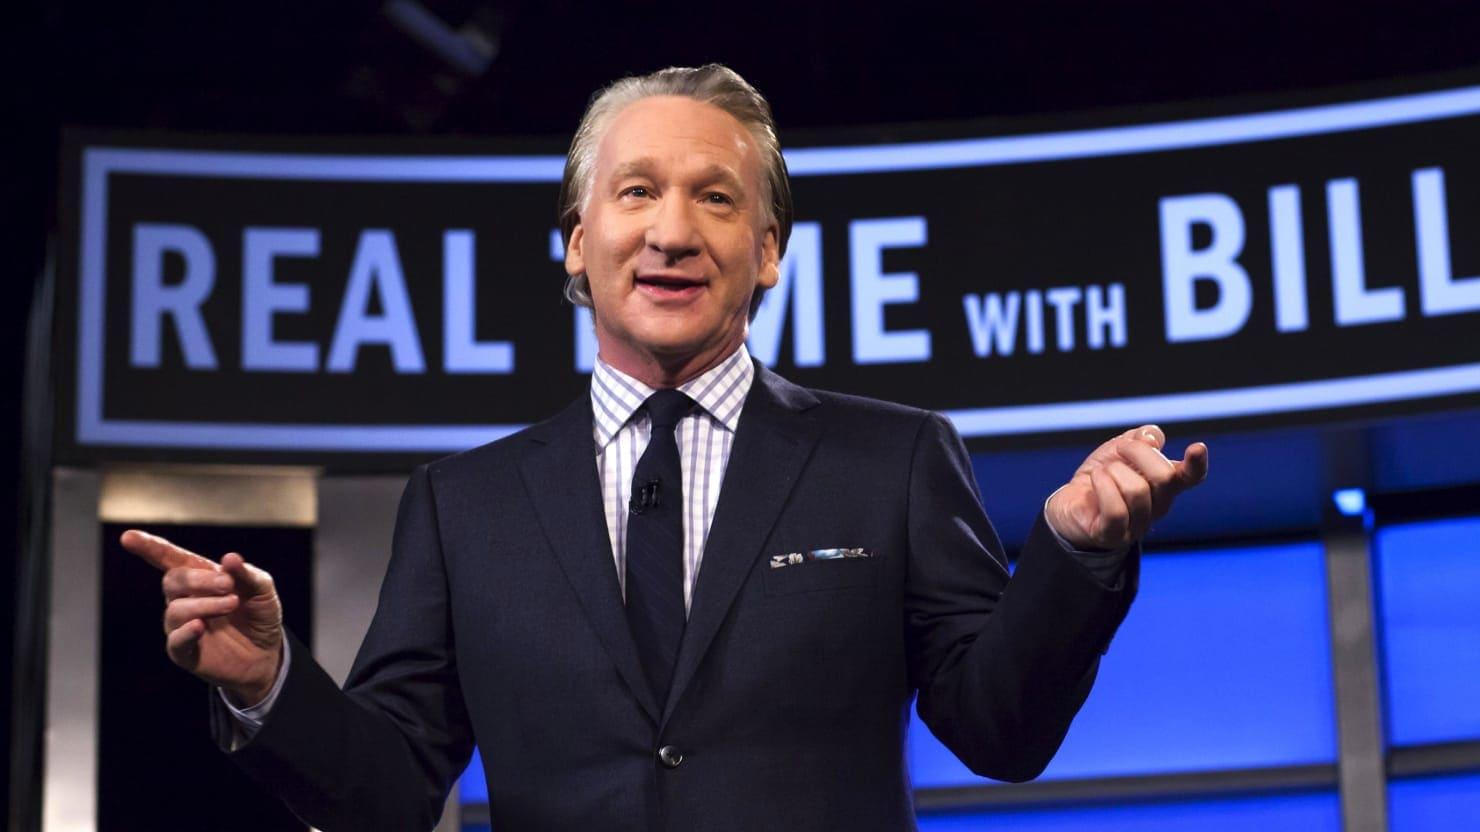 Bill maher is a dick